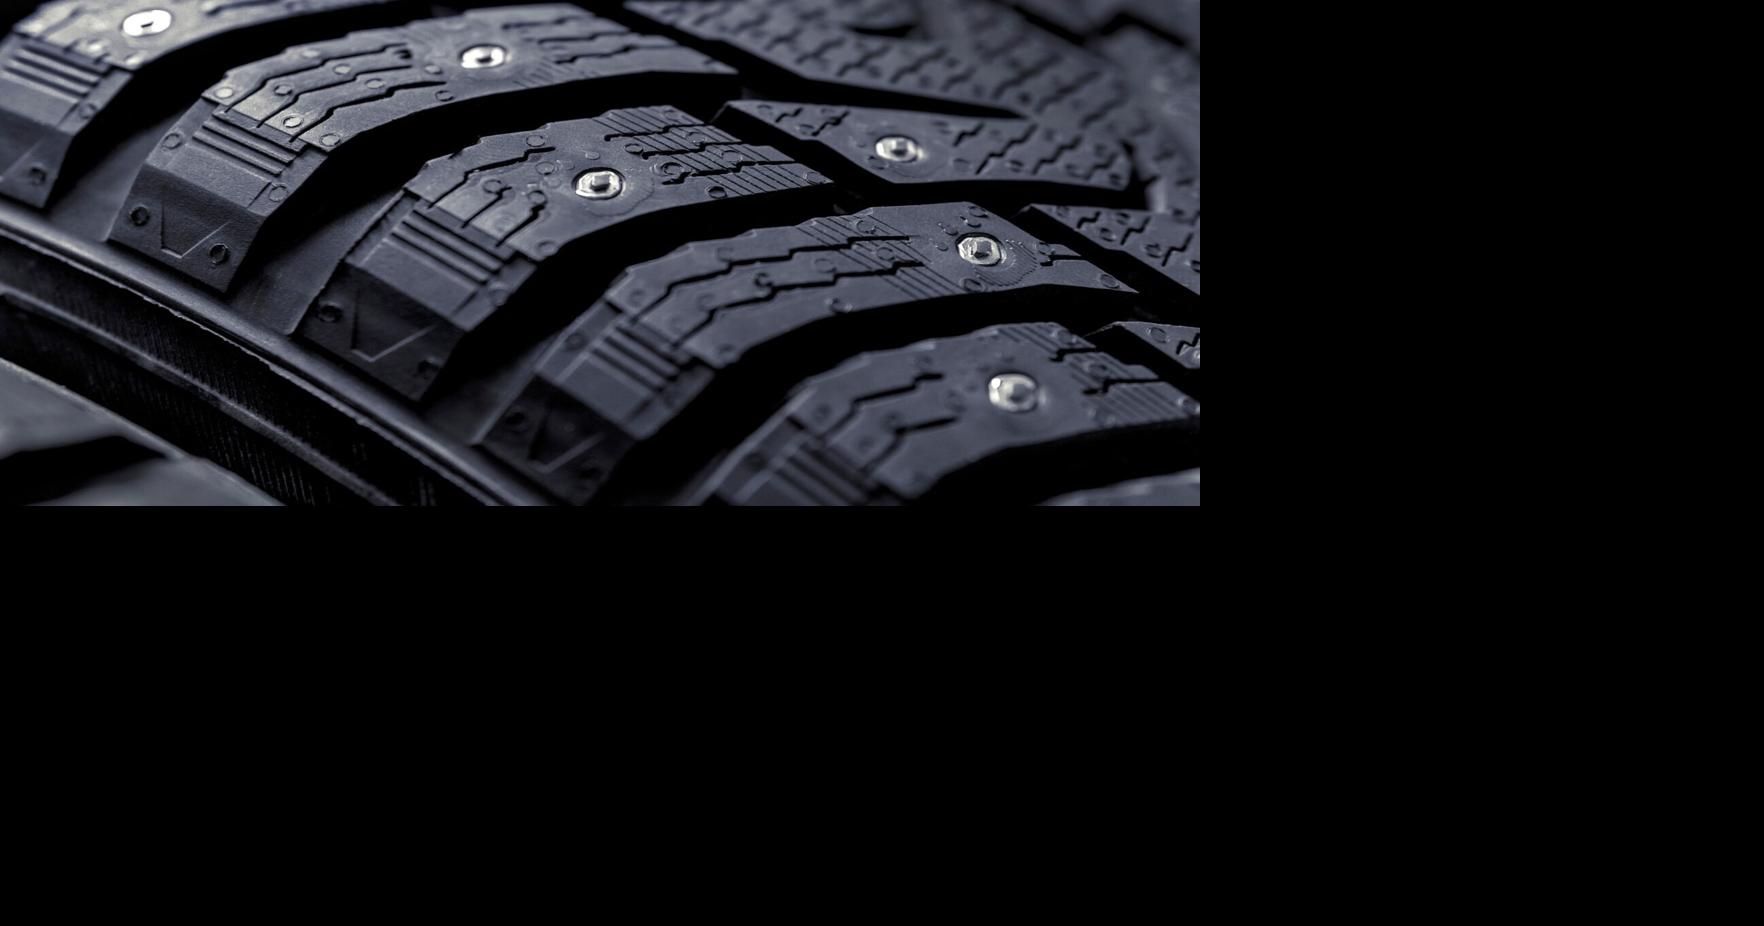 REMINDER: Washington drivers must remove studded tires before end of March